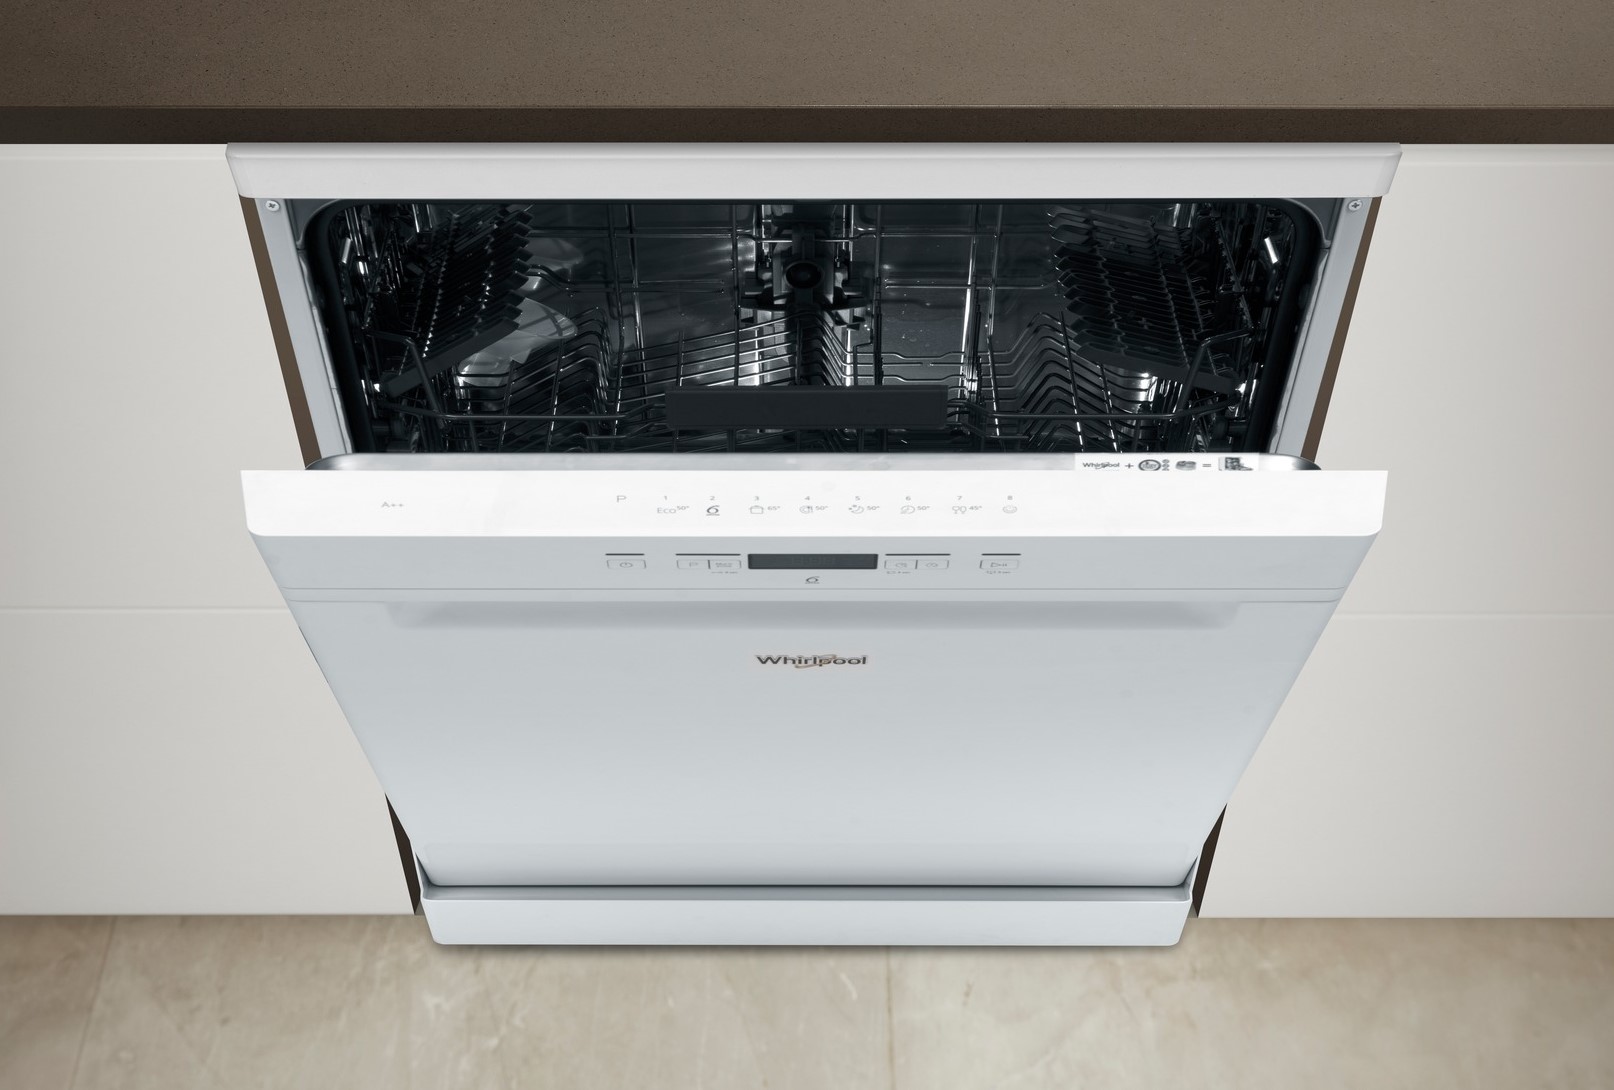 How To Fix The Error Code F7 For Whirlpool Dishwasher